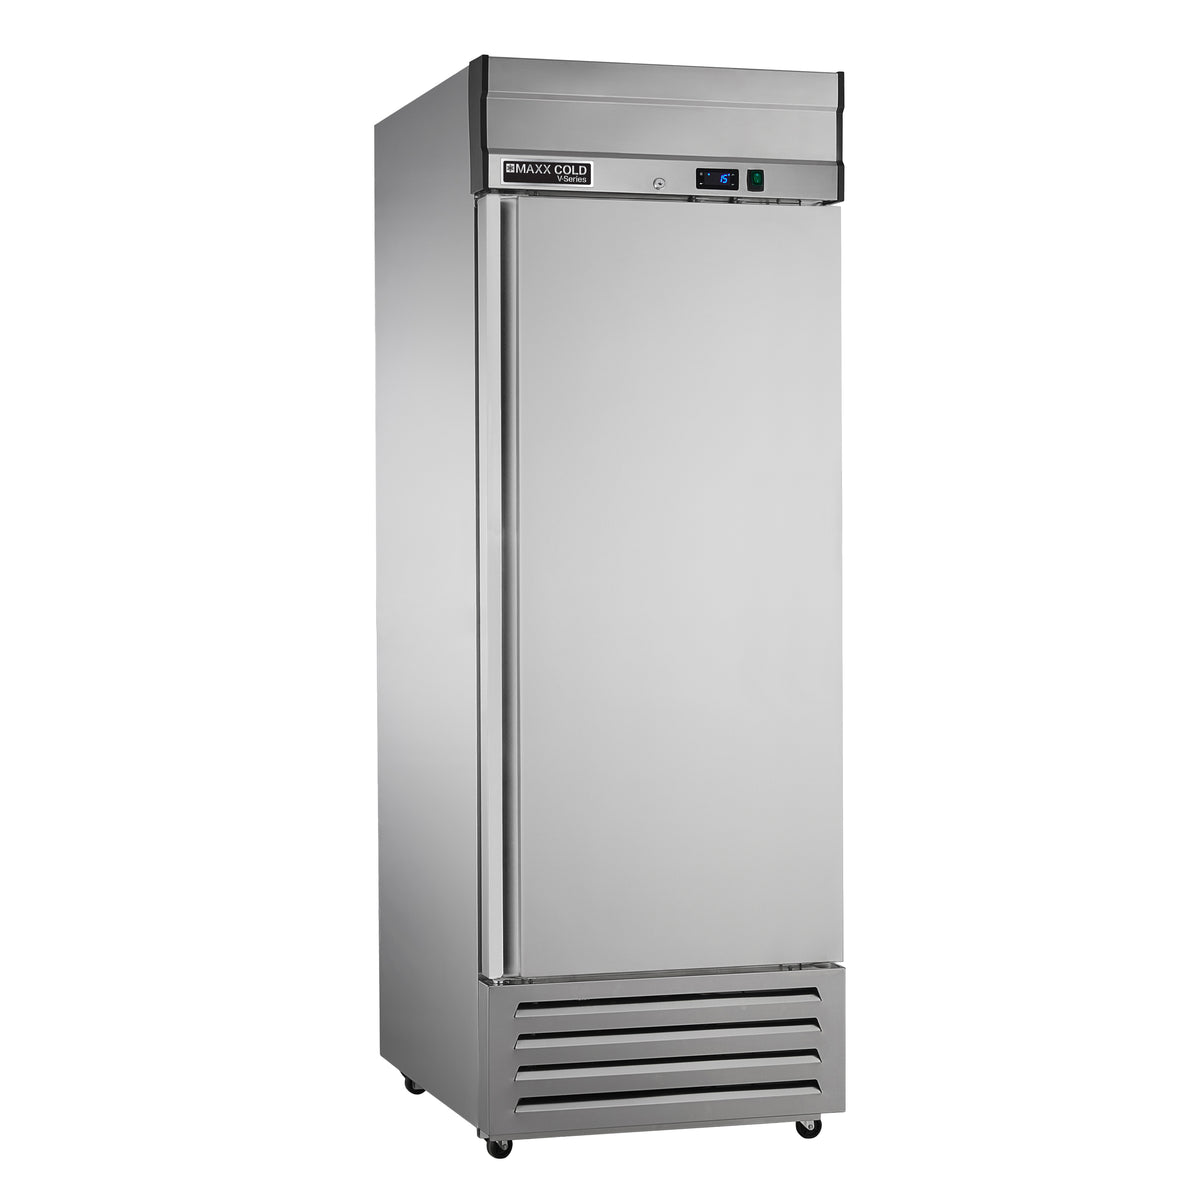 Maxx Cold MVR-23FD V-Series 1 Solid Door Reach-In Refrigerator, Bottom Mount, 27"W, 19 cu. ft. Storage Capacity, in Stainless Steel (MVR-23FDHC)